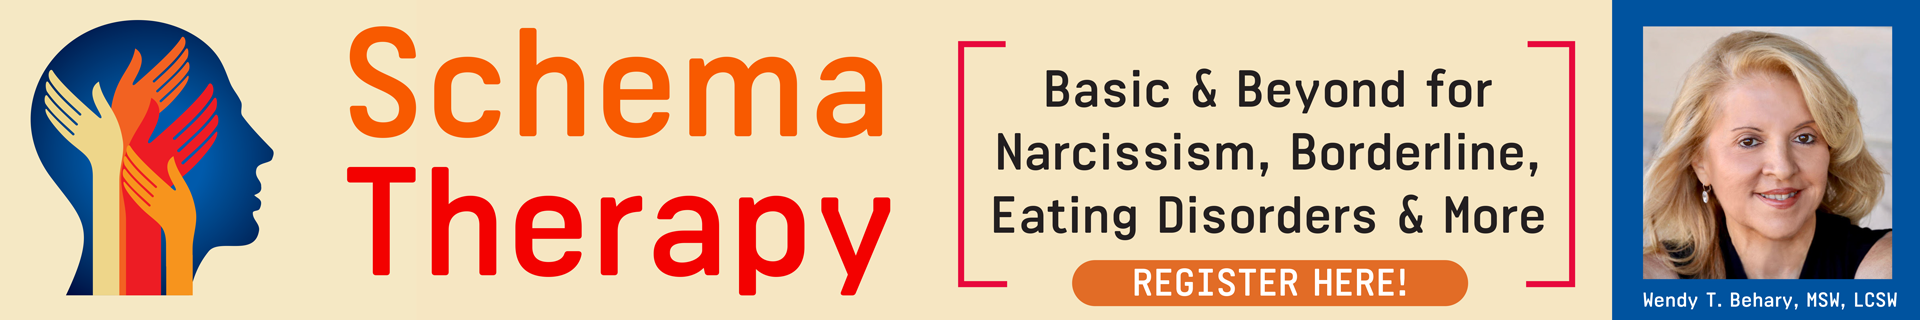 Schema Therapy: Basic & Beyond for Narcissism, Borderline, Eating Disorders & More